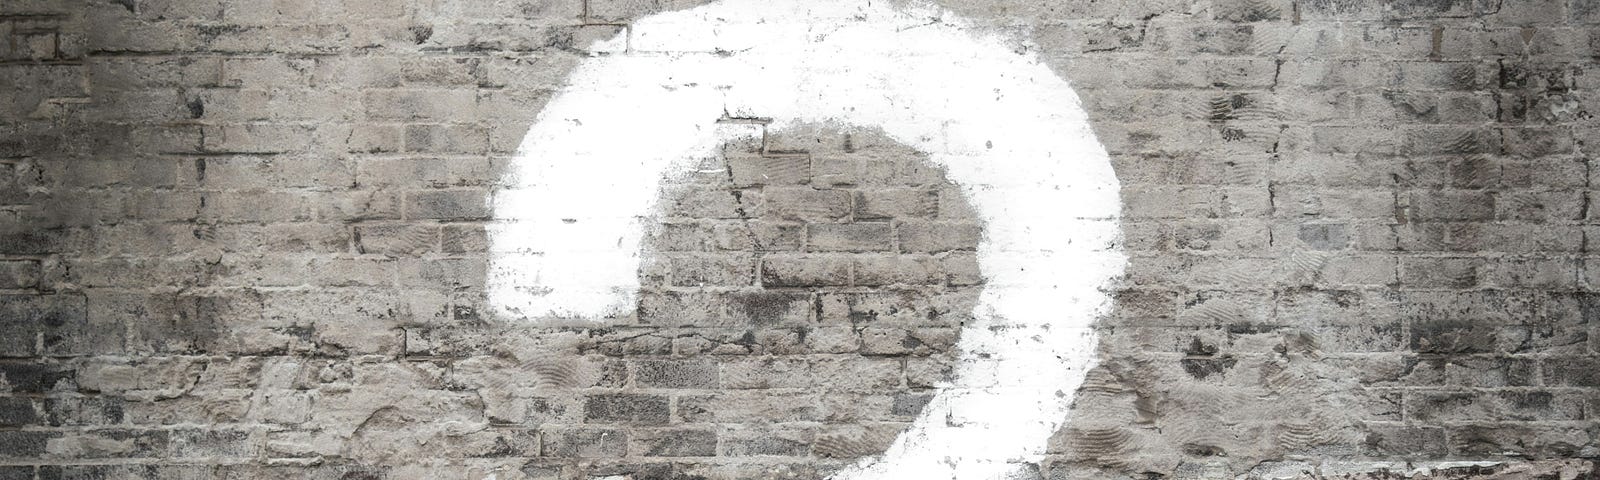 Question mark on brick wall.